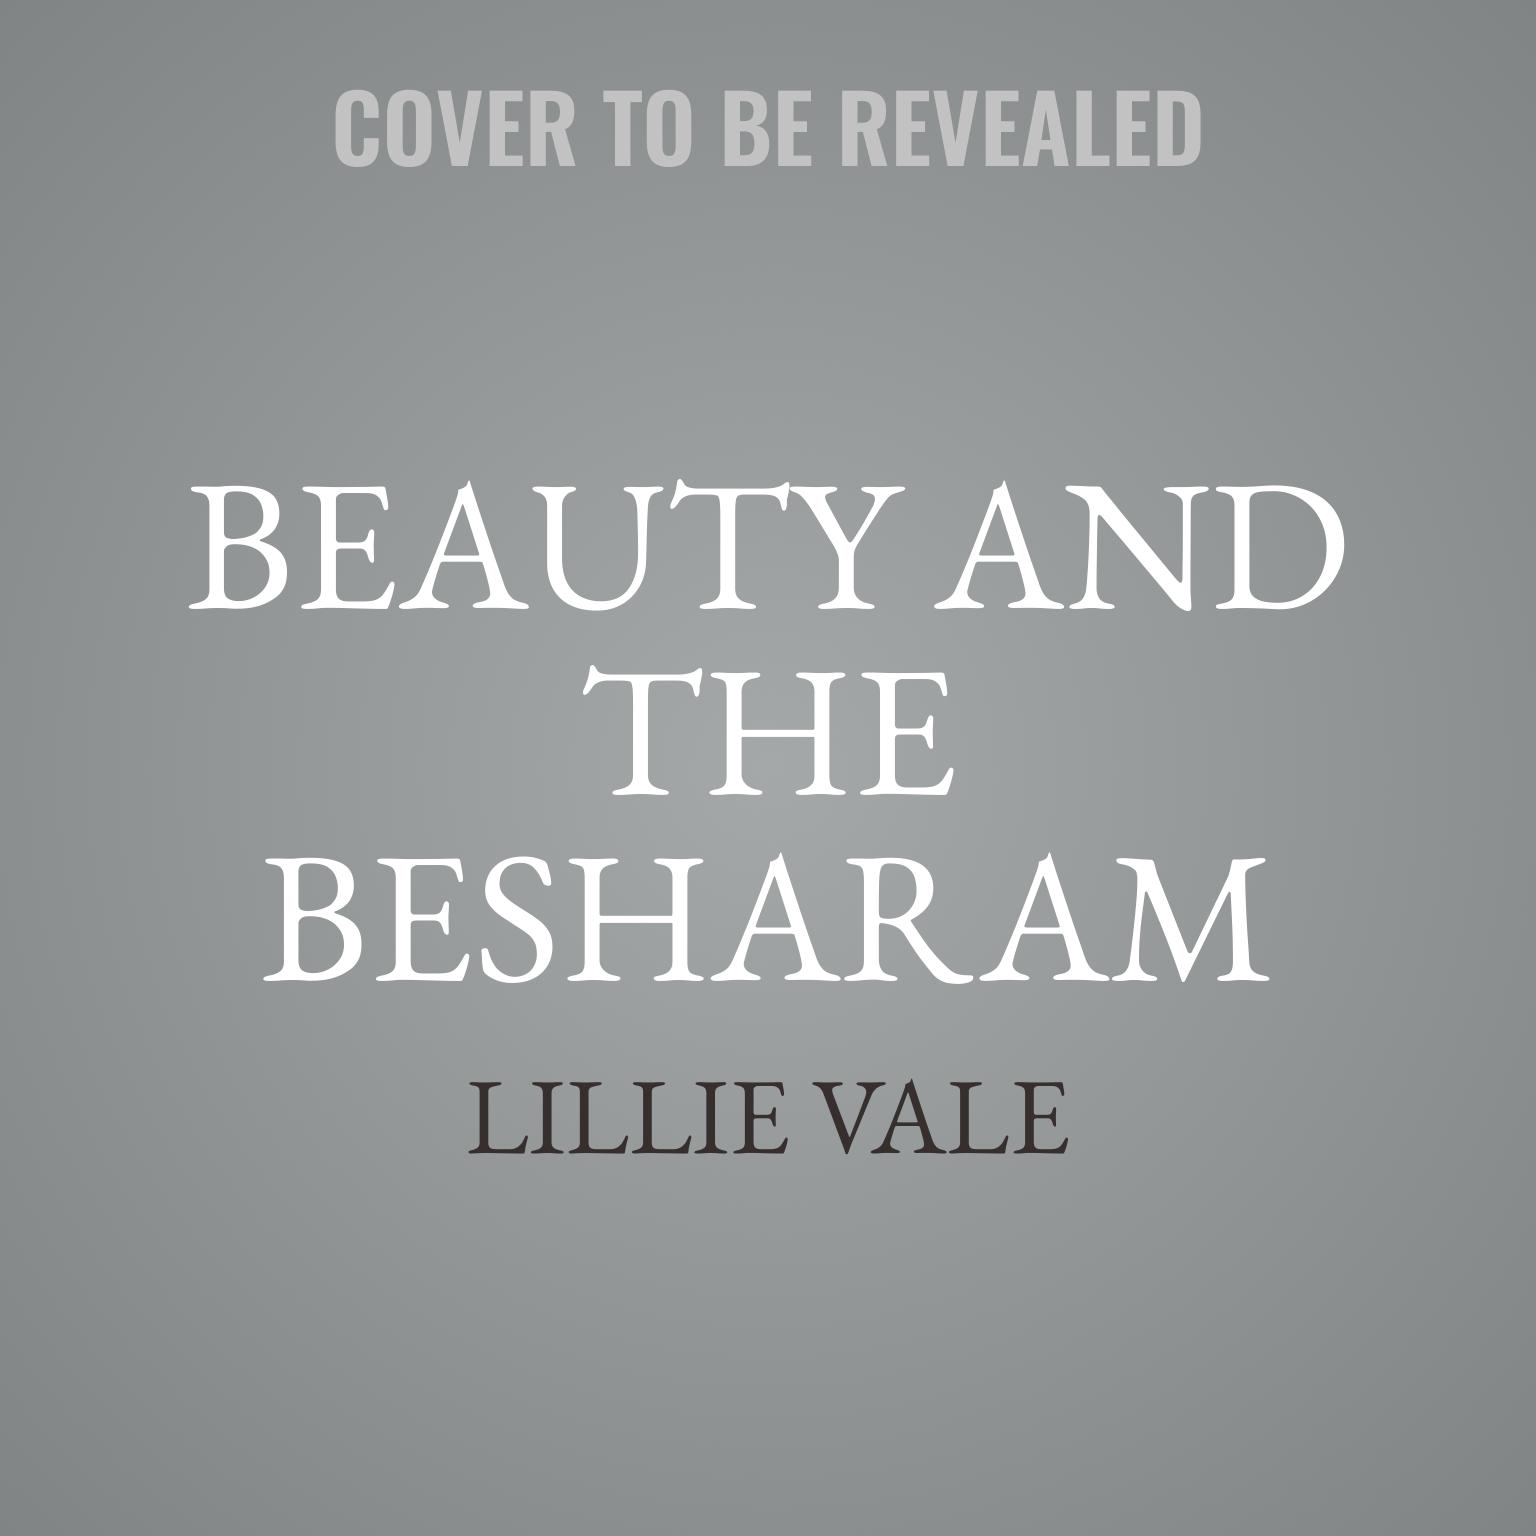 Beauty and the Besharam Audiobook, by Lillie Vale